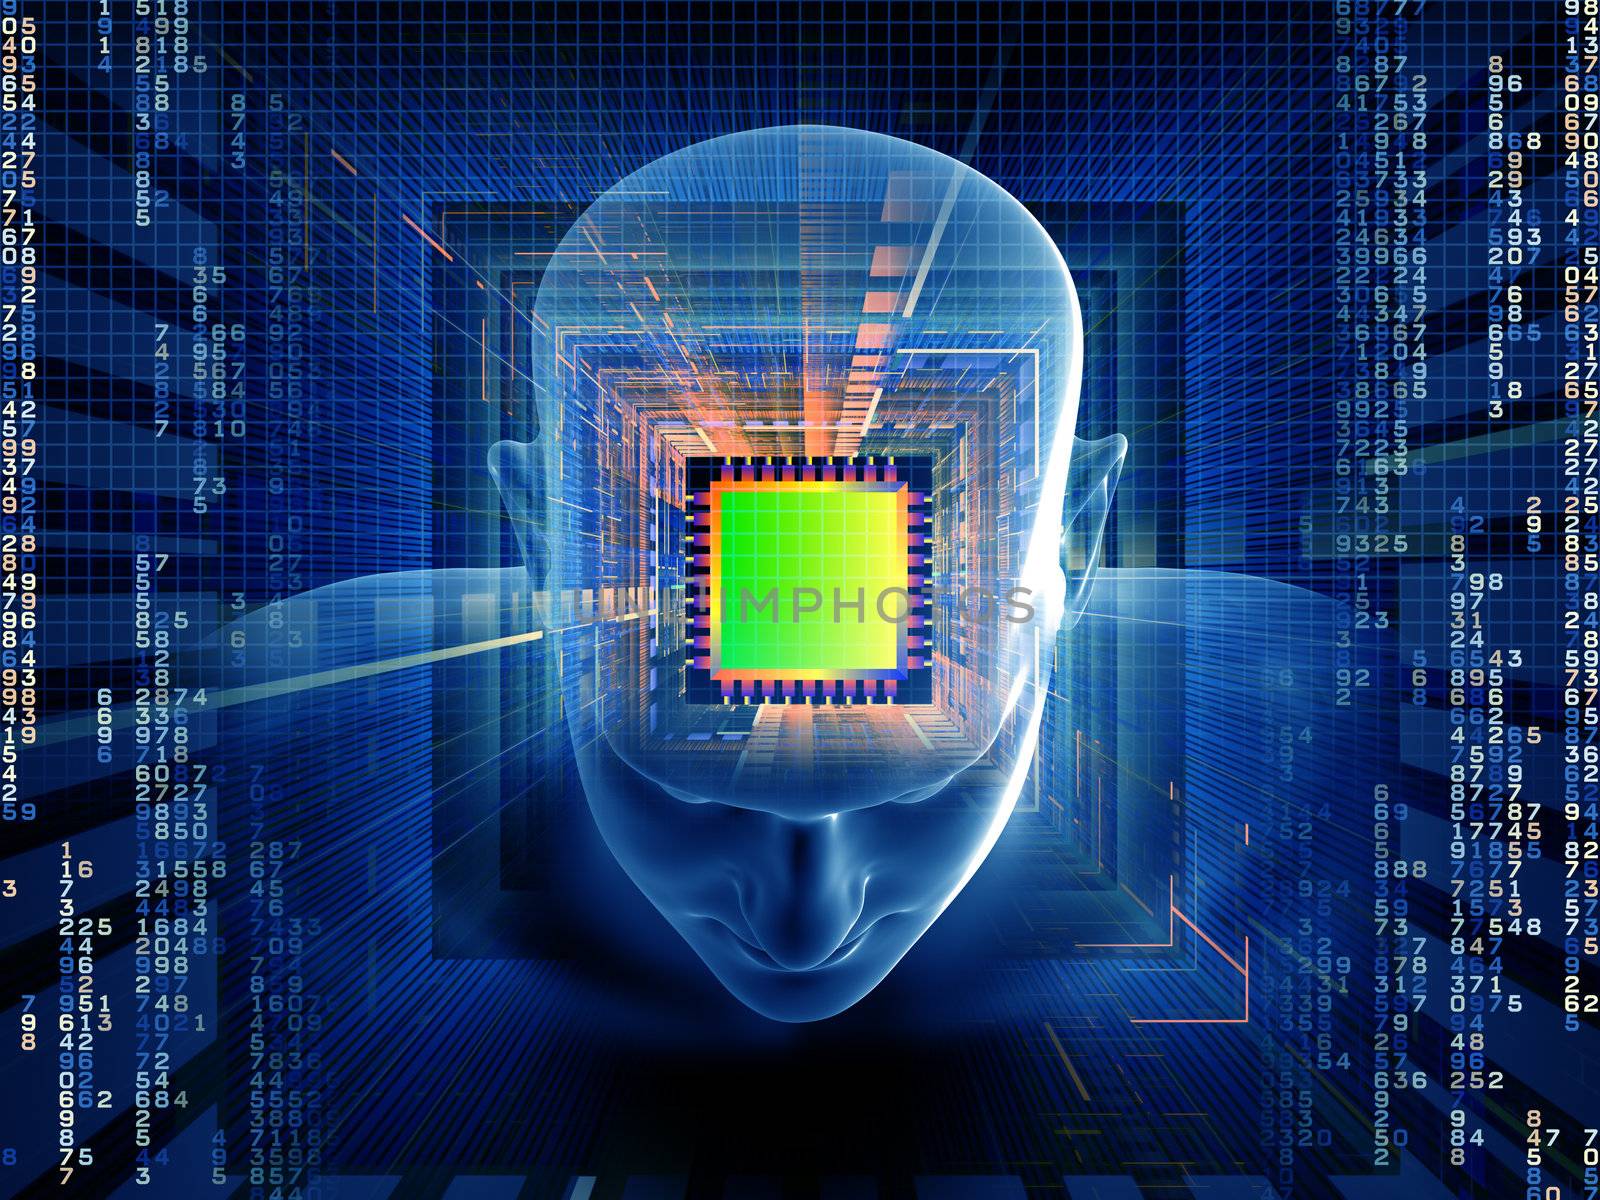 Collage of human head, computer chip, digits and various abstract elements on the subject of intelligence, science, technology, human and artificial mind